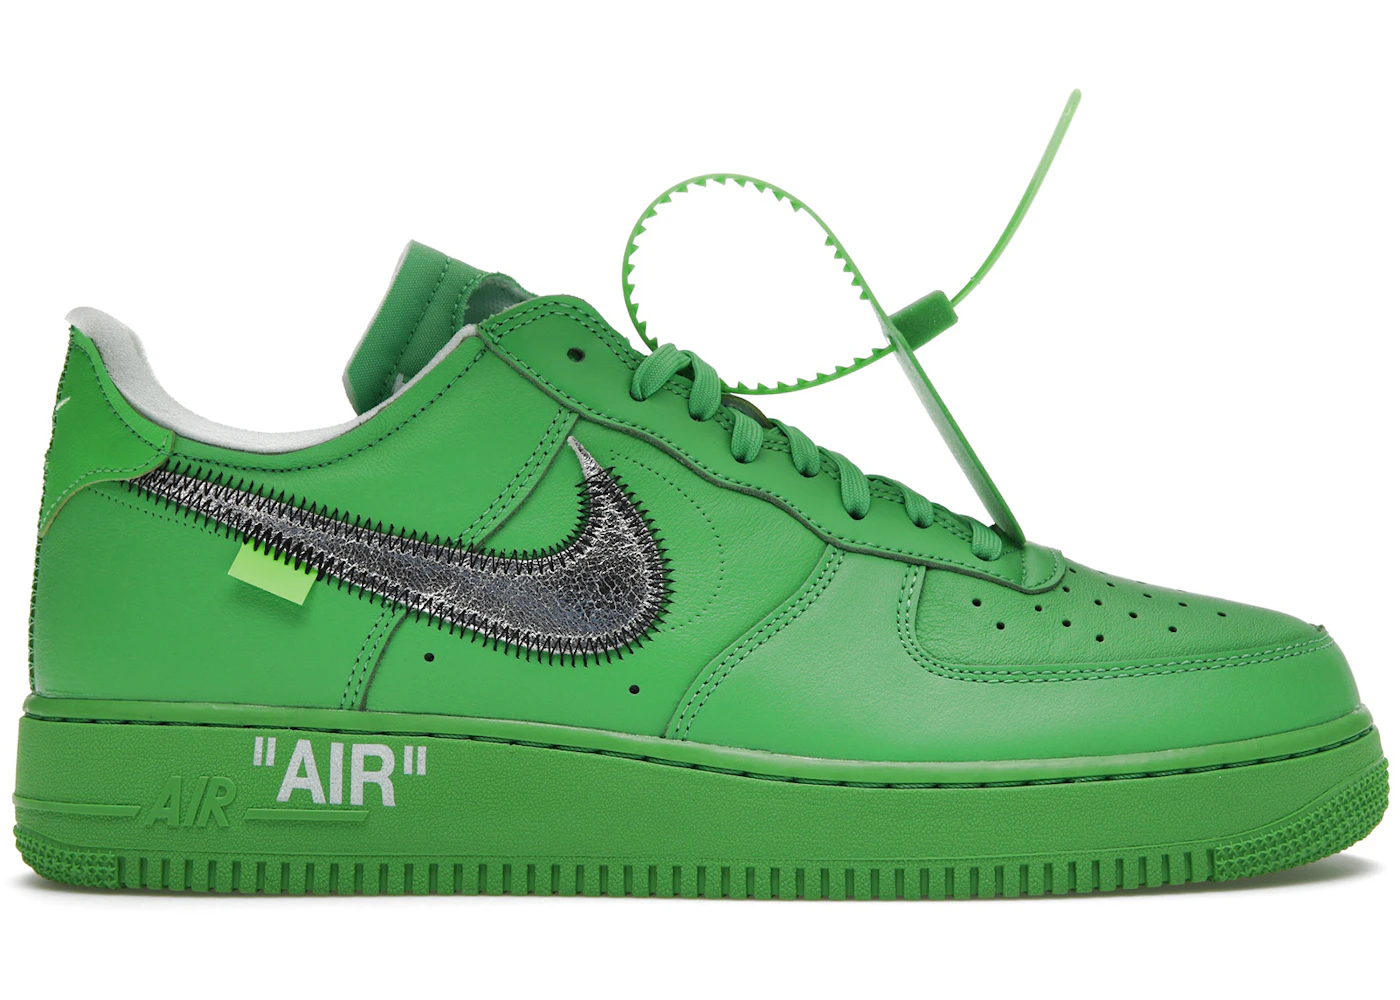 Nike Air Force 1 Low Off-White Brooklyn - DX1419-300 - US